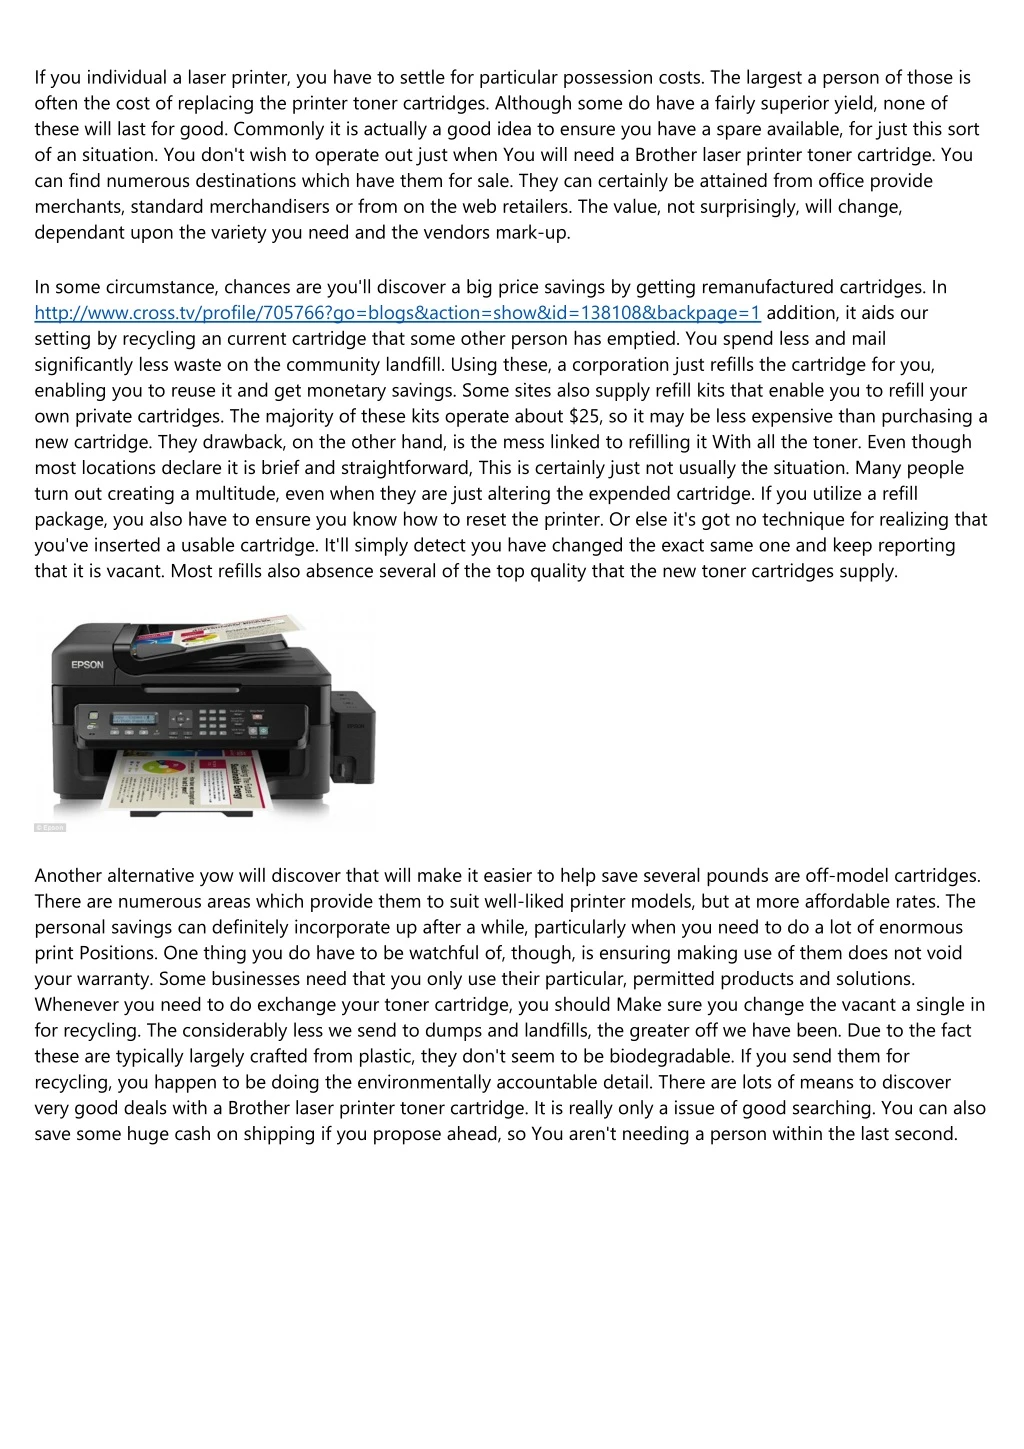 if you individual a laser printer you have